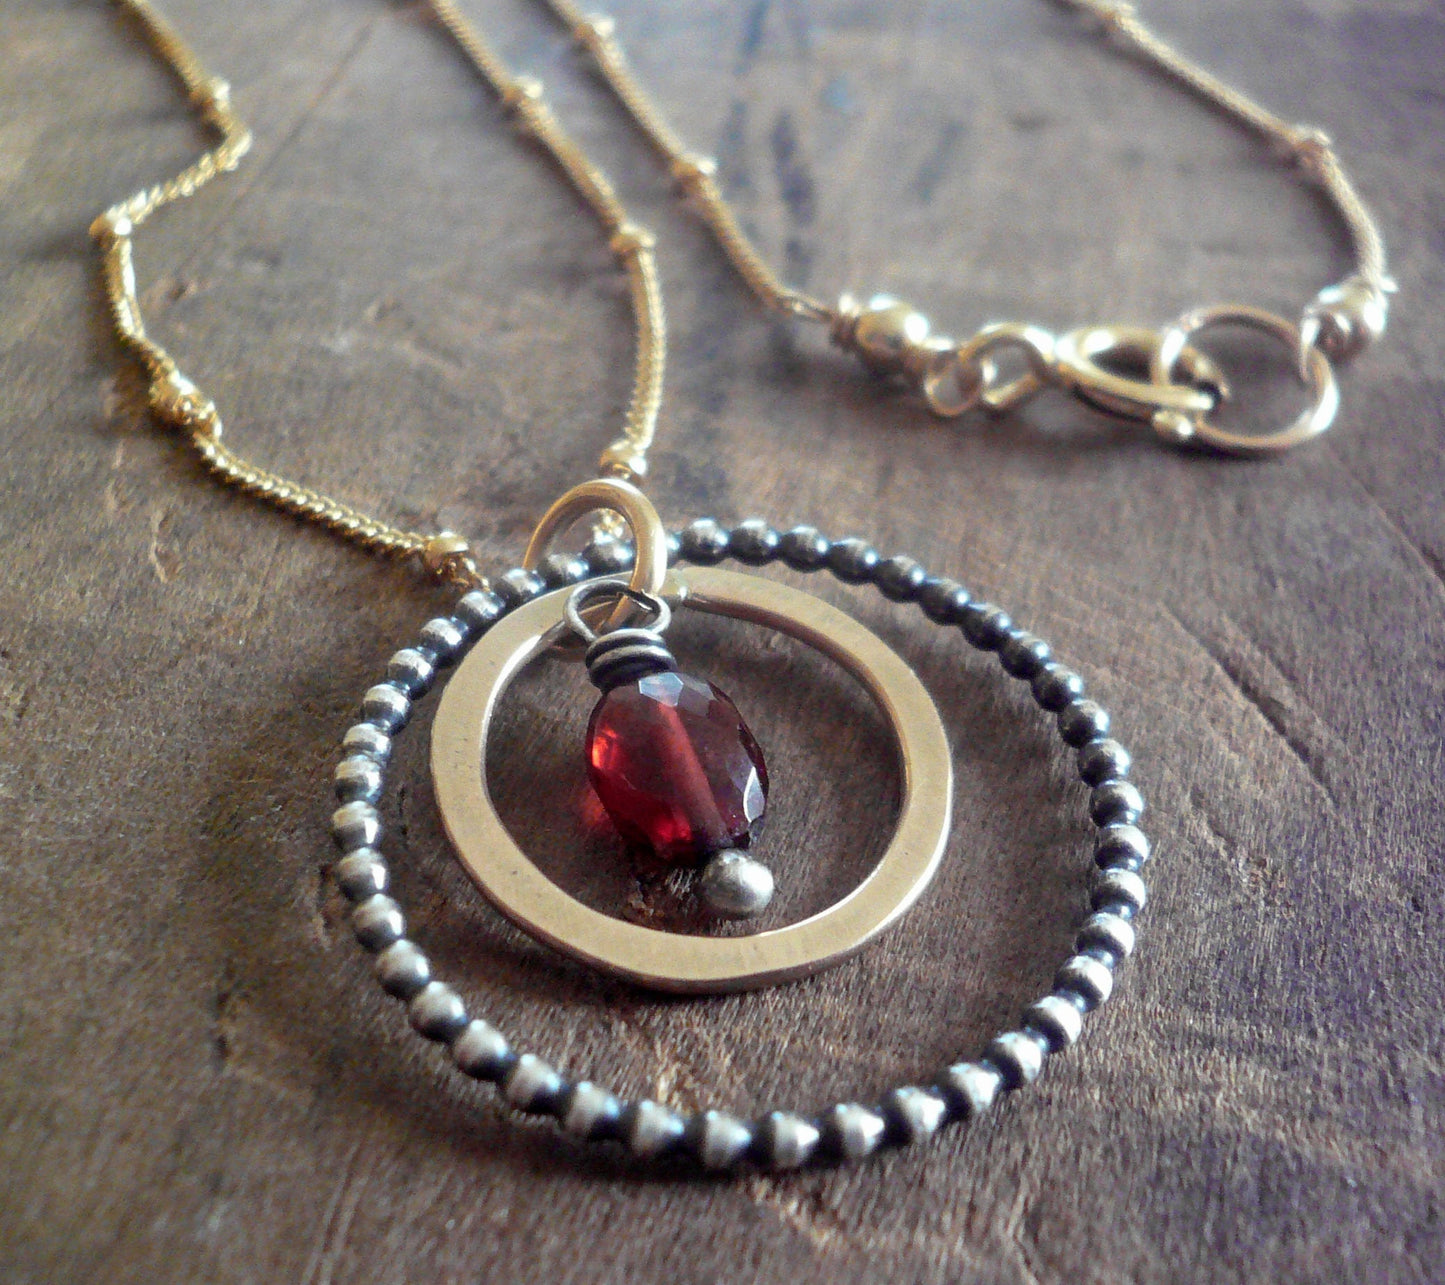 Rouge Collection Necklace - Garnet. Oxidized sterling silver and 14kt Goldfill. Handmade